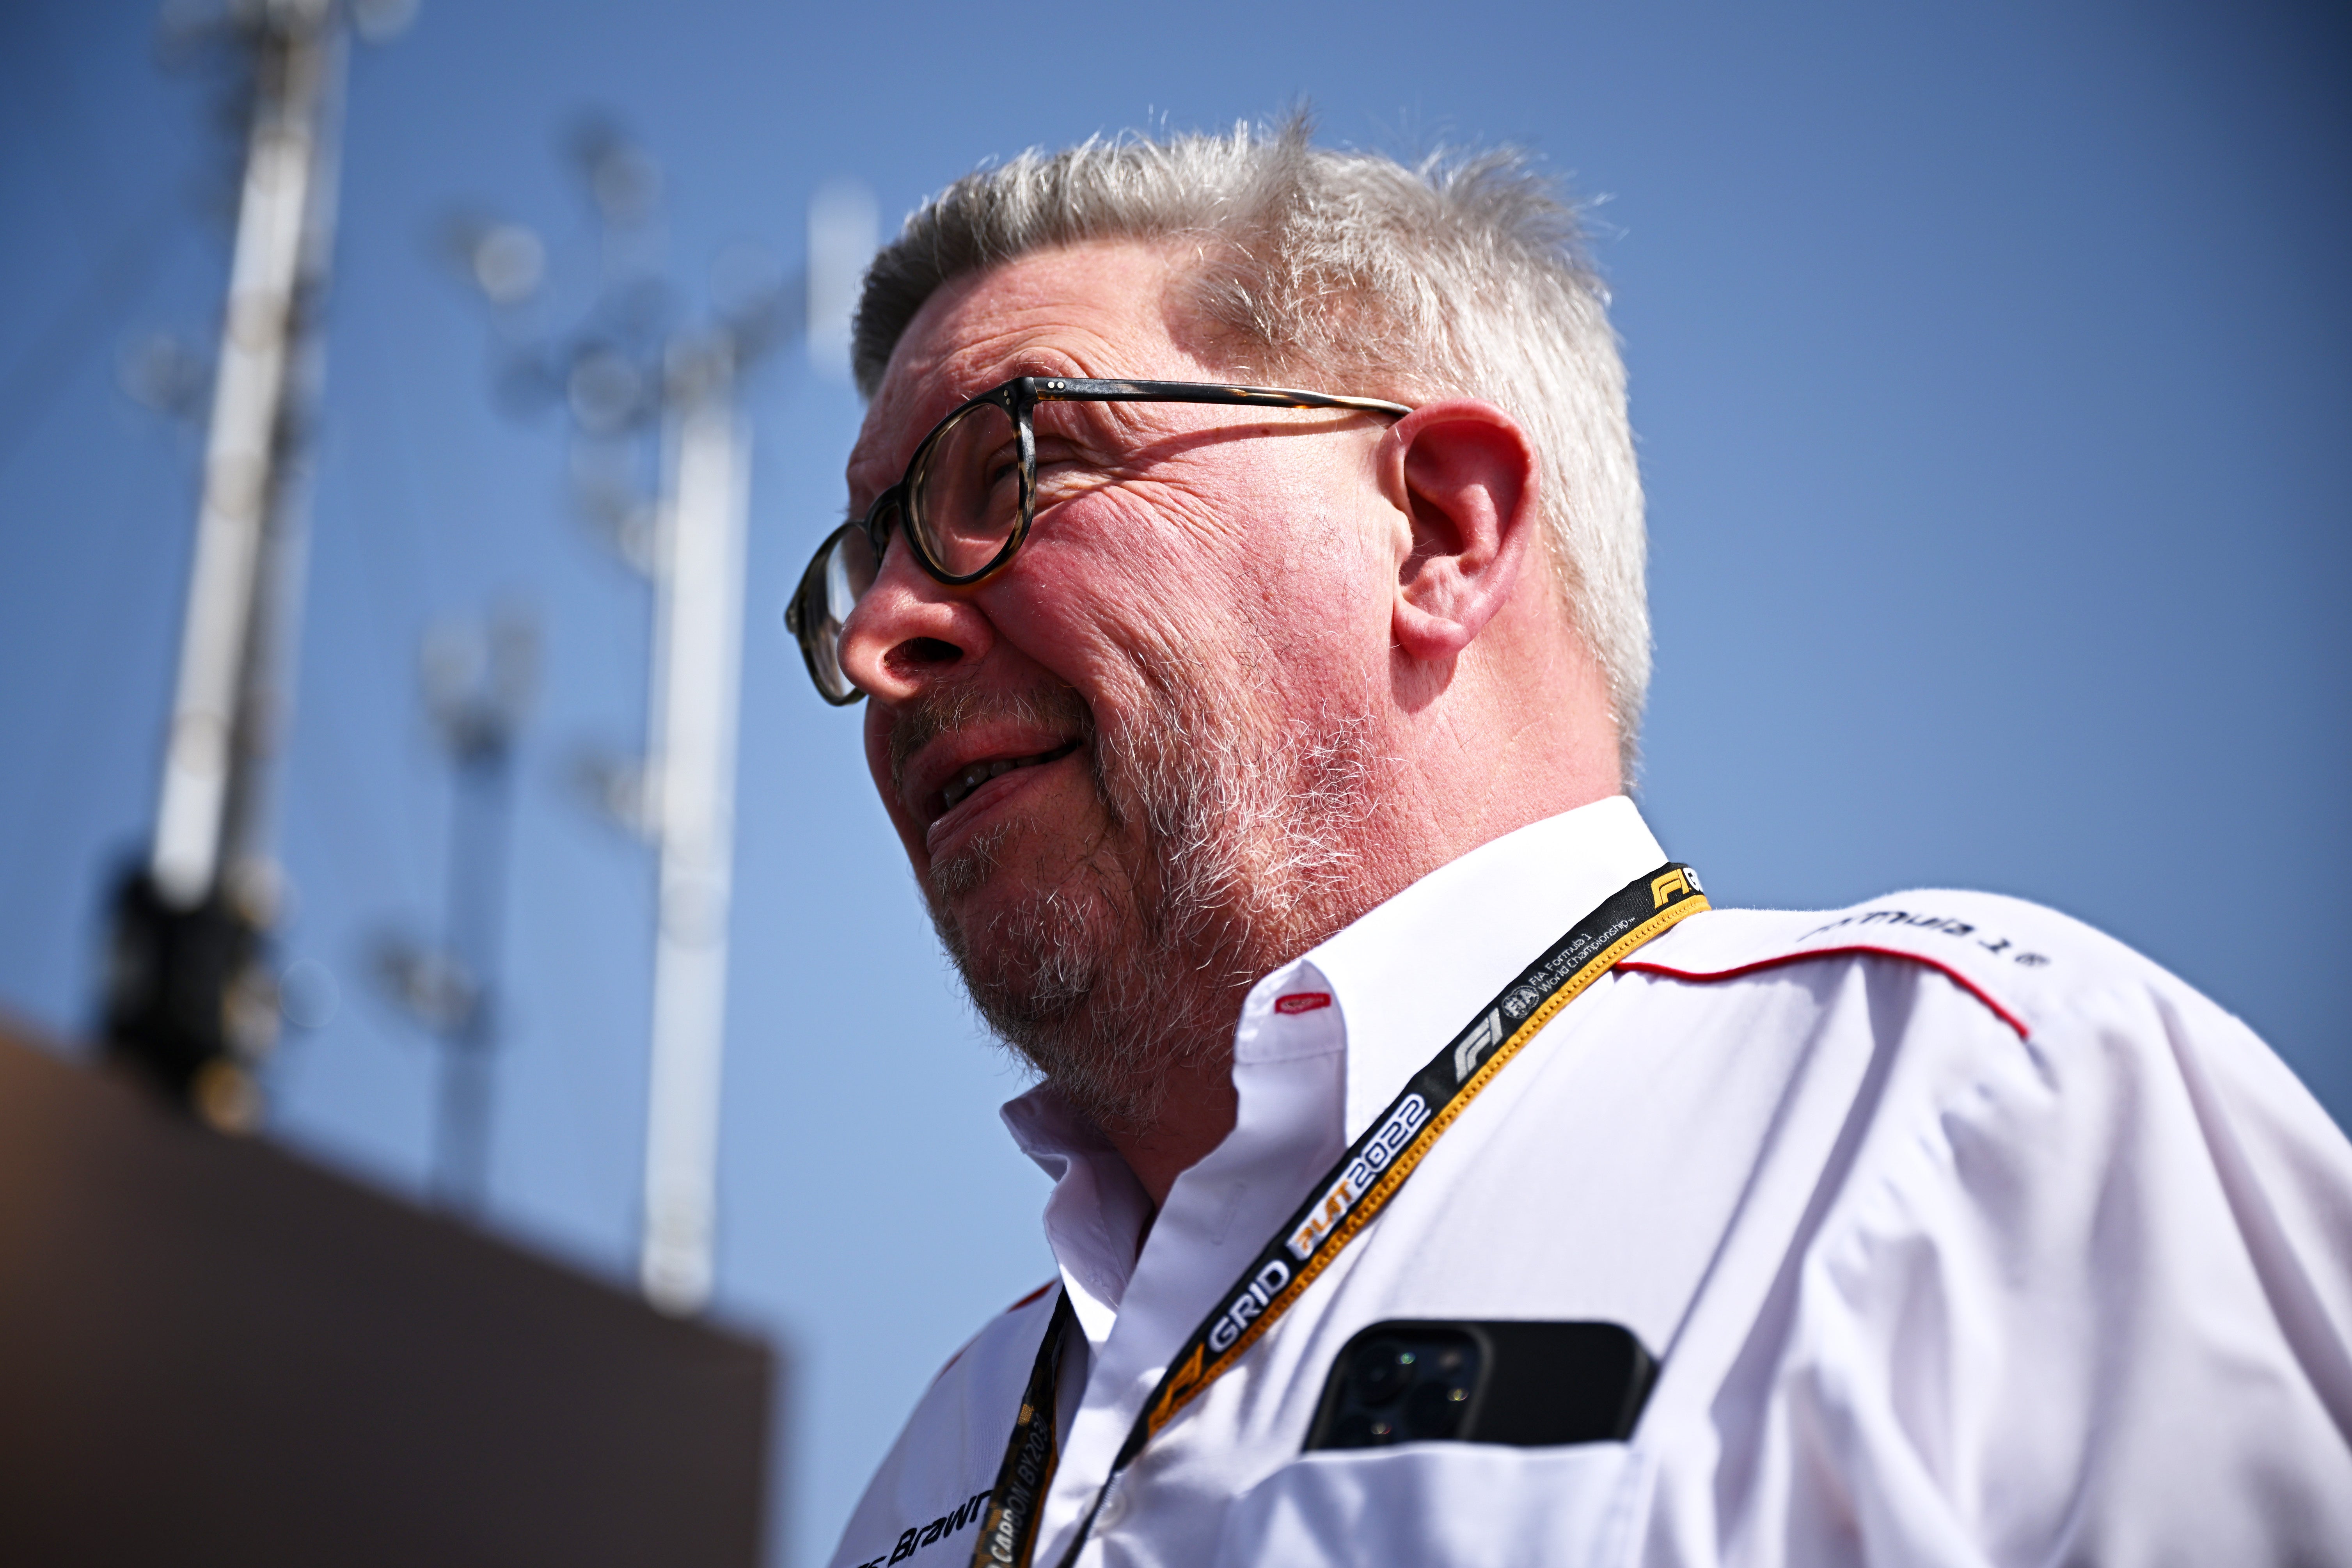 F1 managing director Ross Brawn previously worked as Mercedes’ team prinicipal